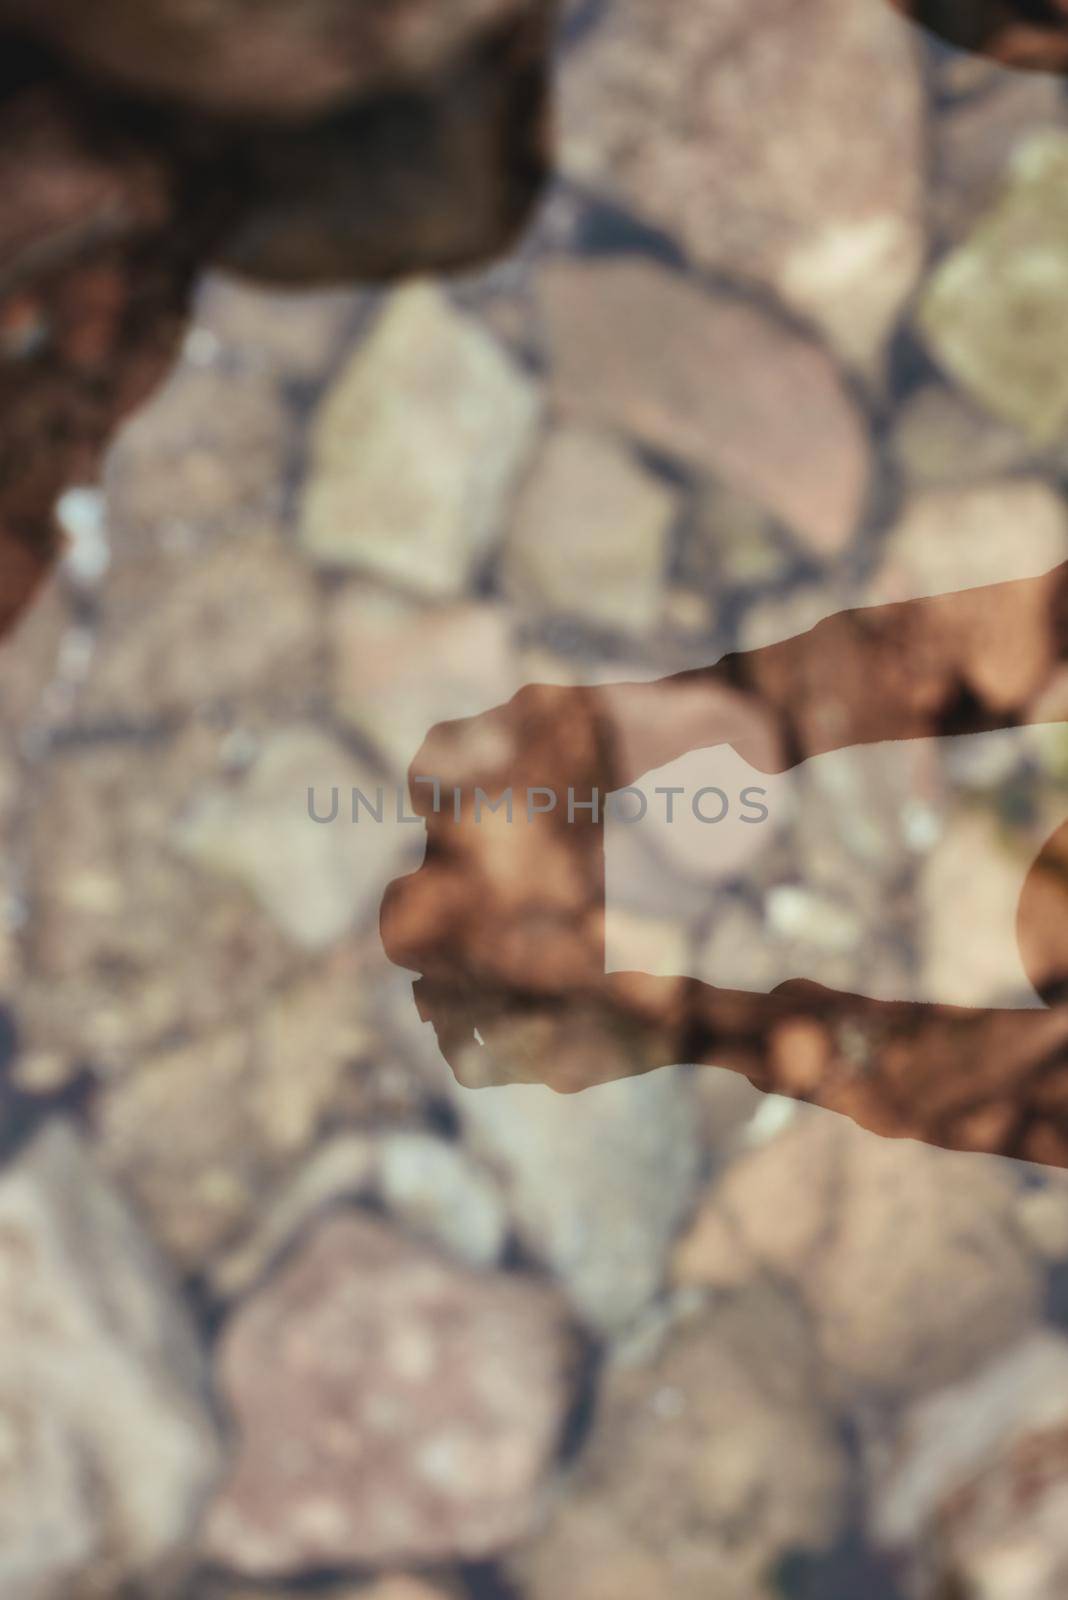 Shadow of the person holding photocamera. Reflection on the water. Nature concept. Travel concept